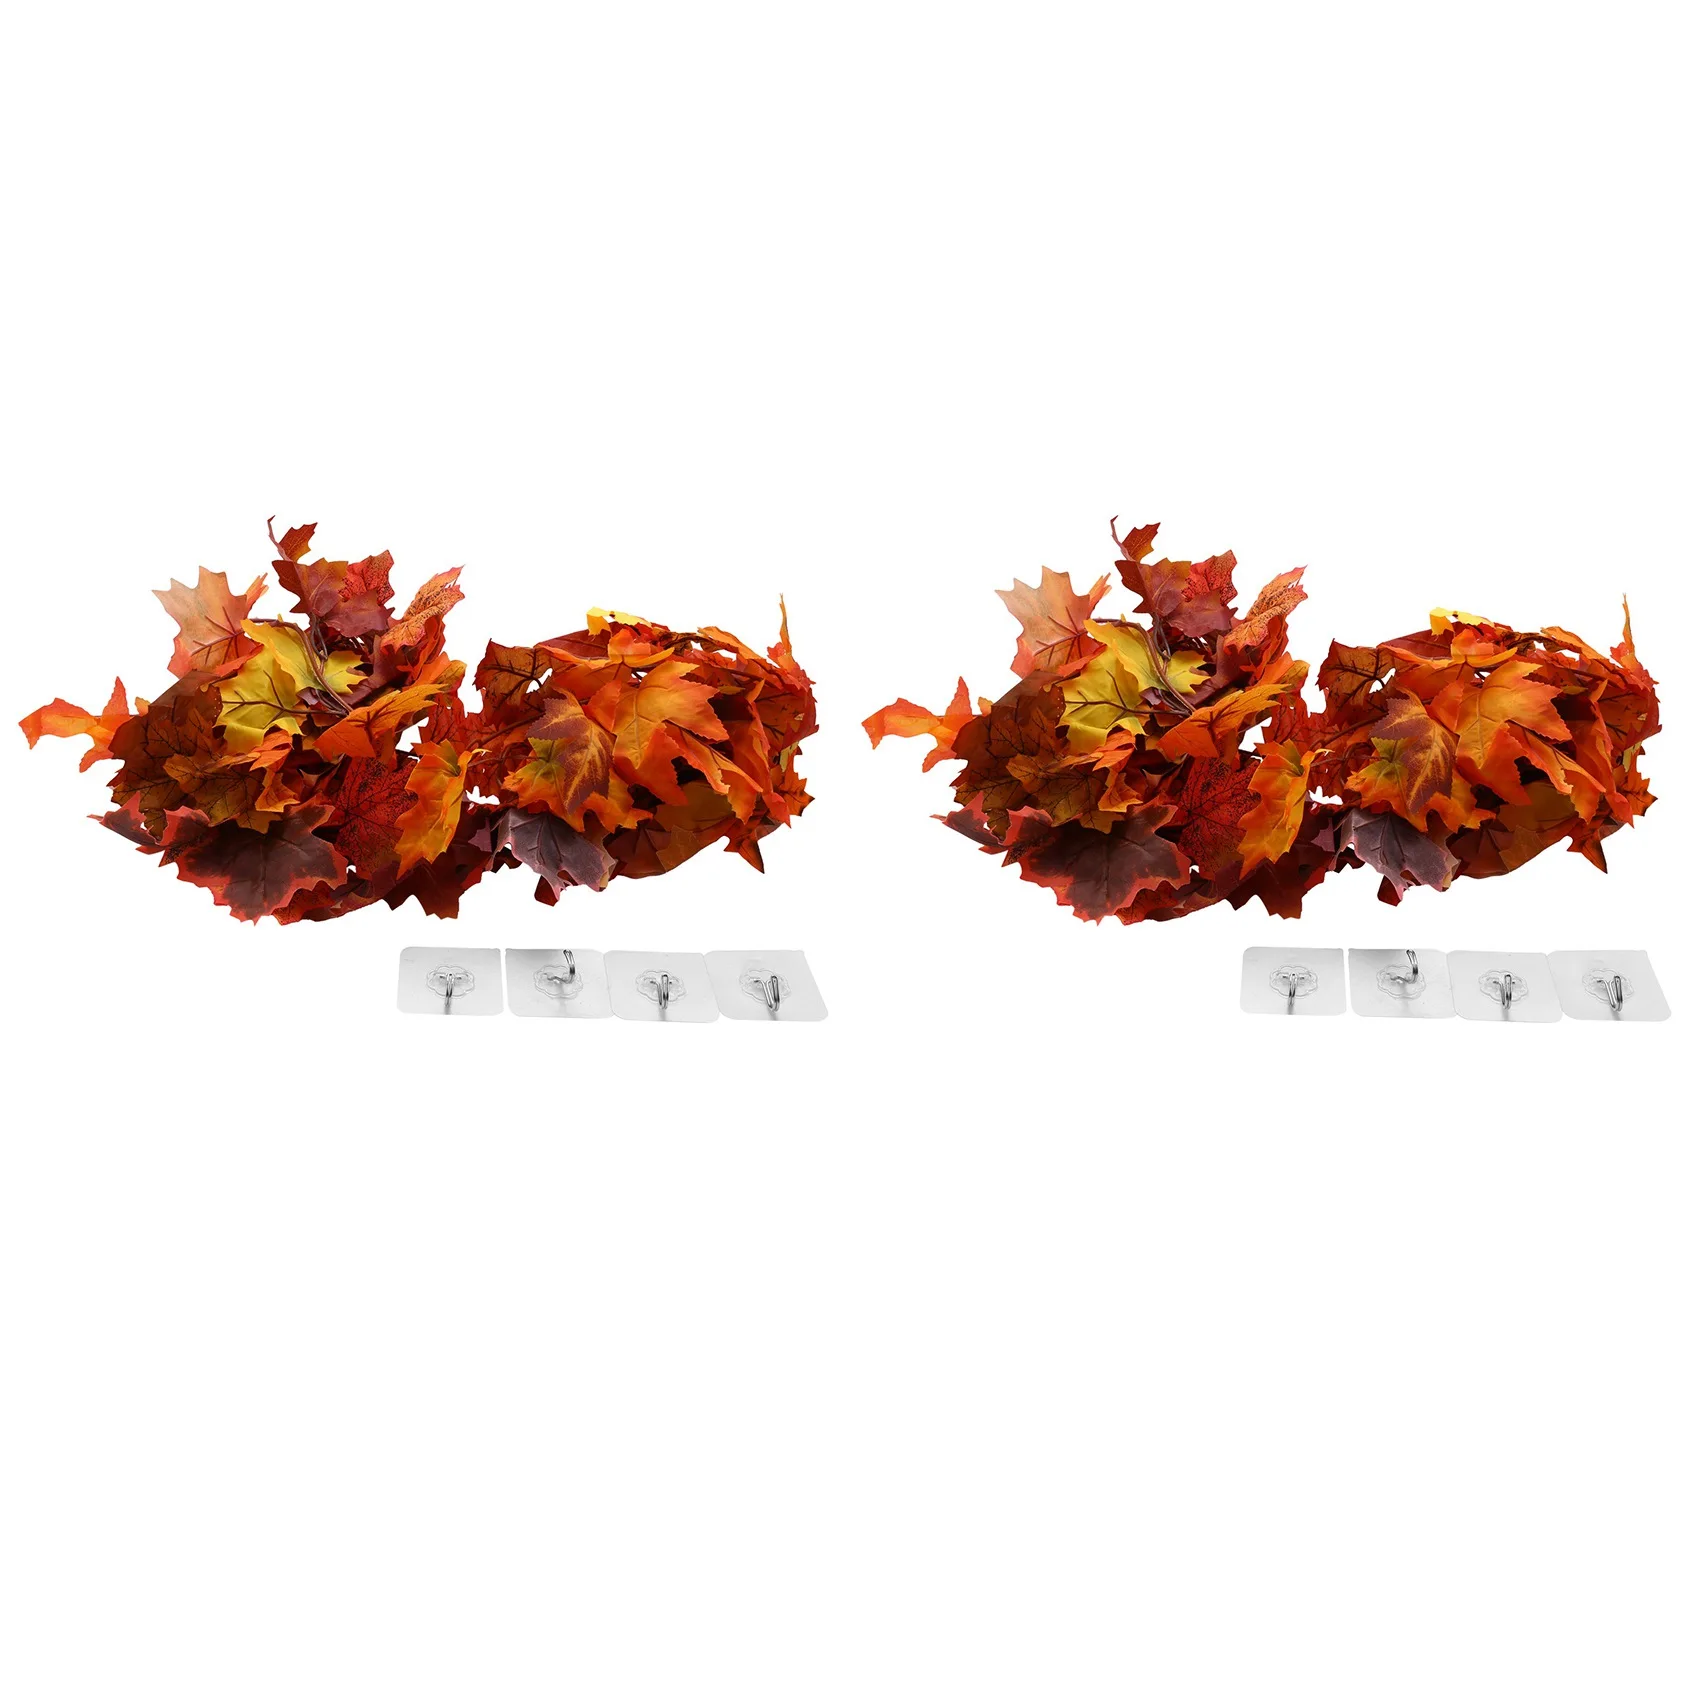 4 Pcs Artificial Autumn Maple Leaves Garland Fall Hanging Plant for Home Wall Doorway Backdrop Fireplace Decoration